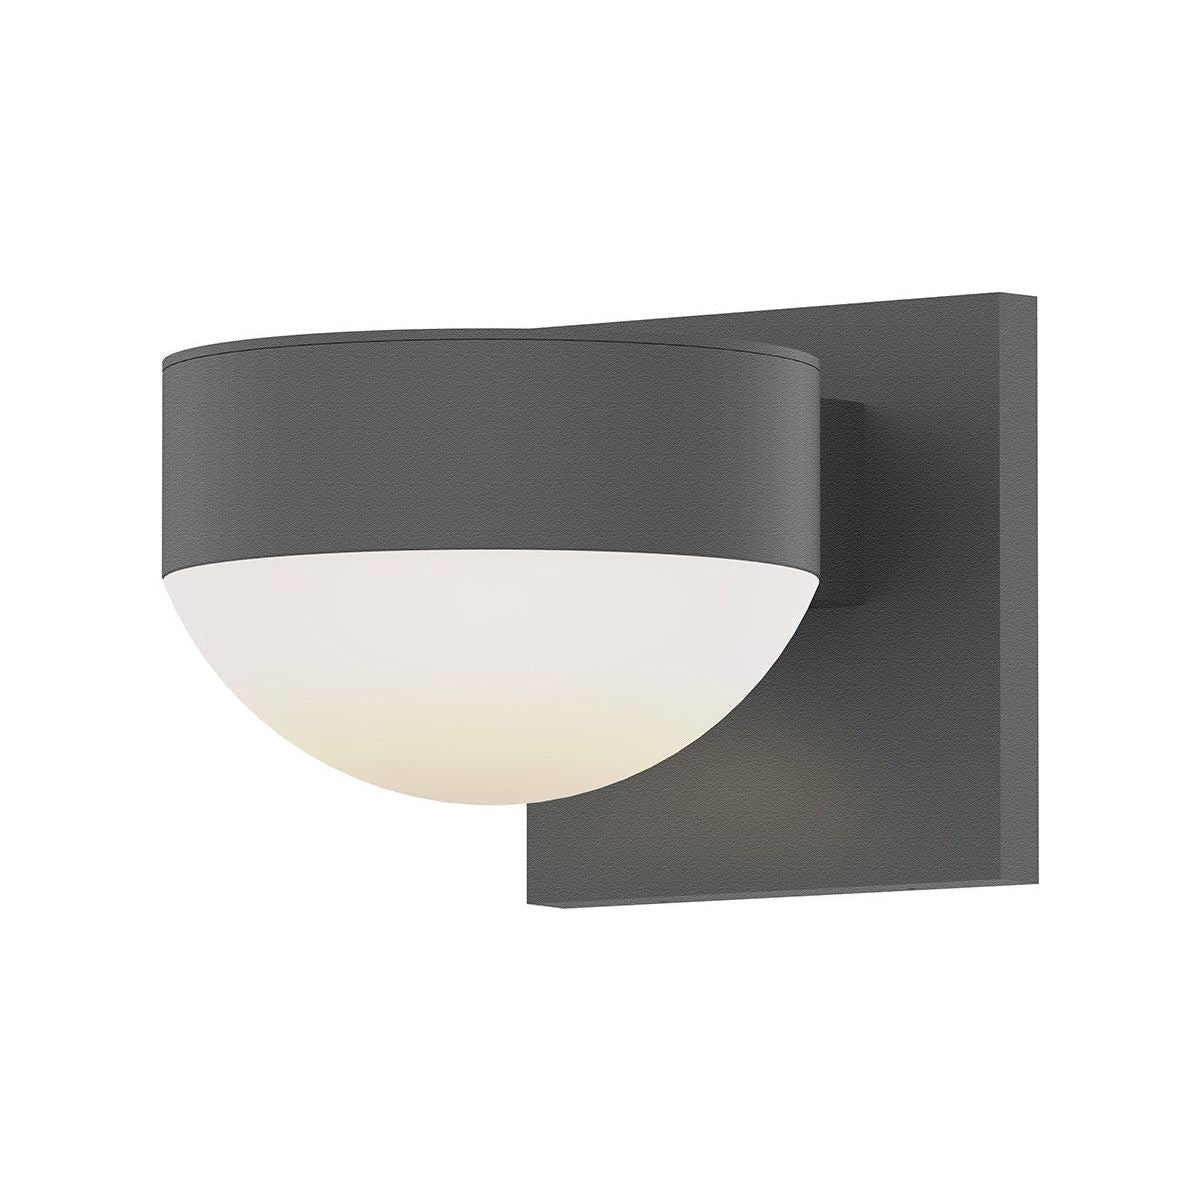 REALS Up/Down LED Sconce with Plate Top and Dome Bottom